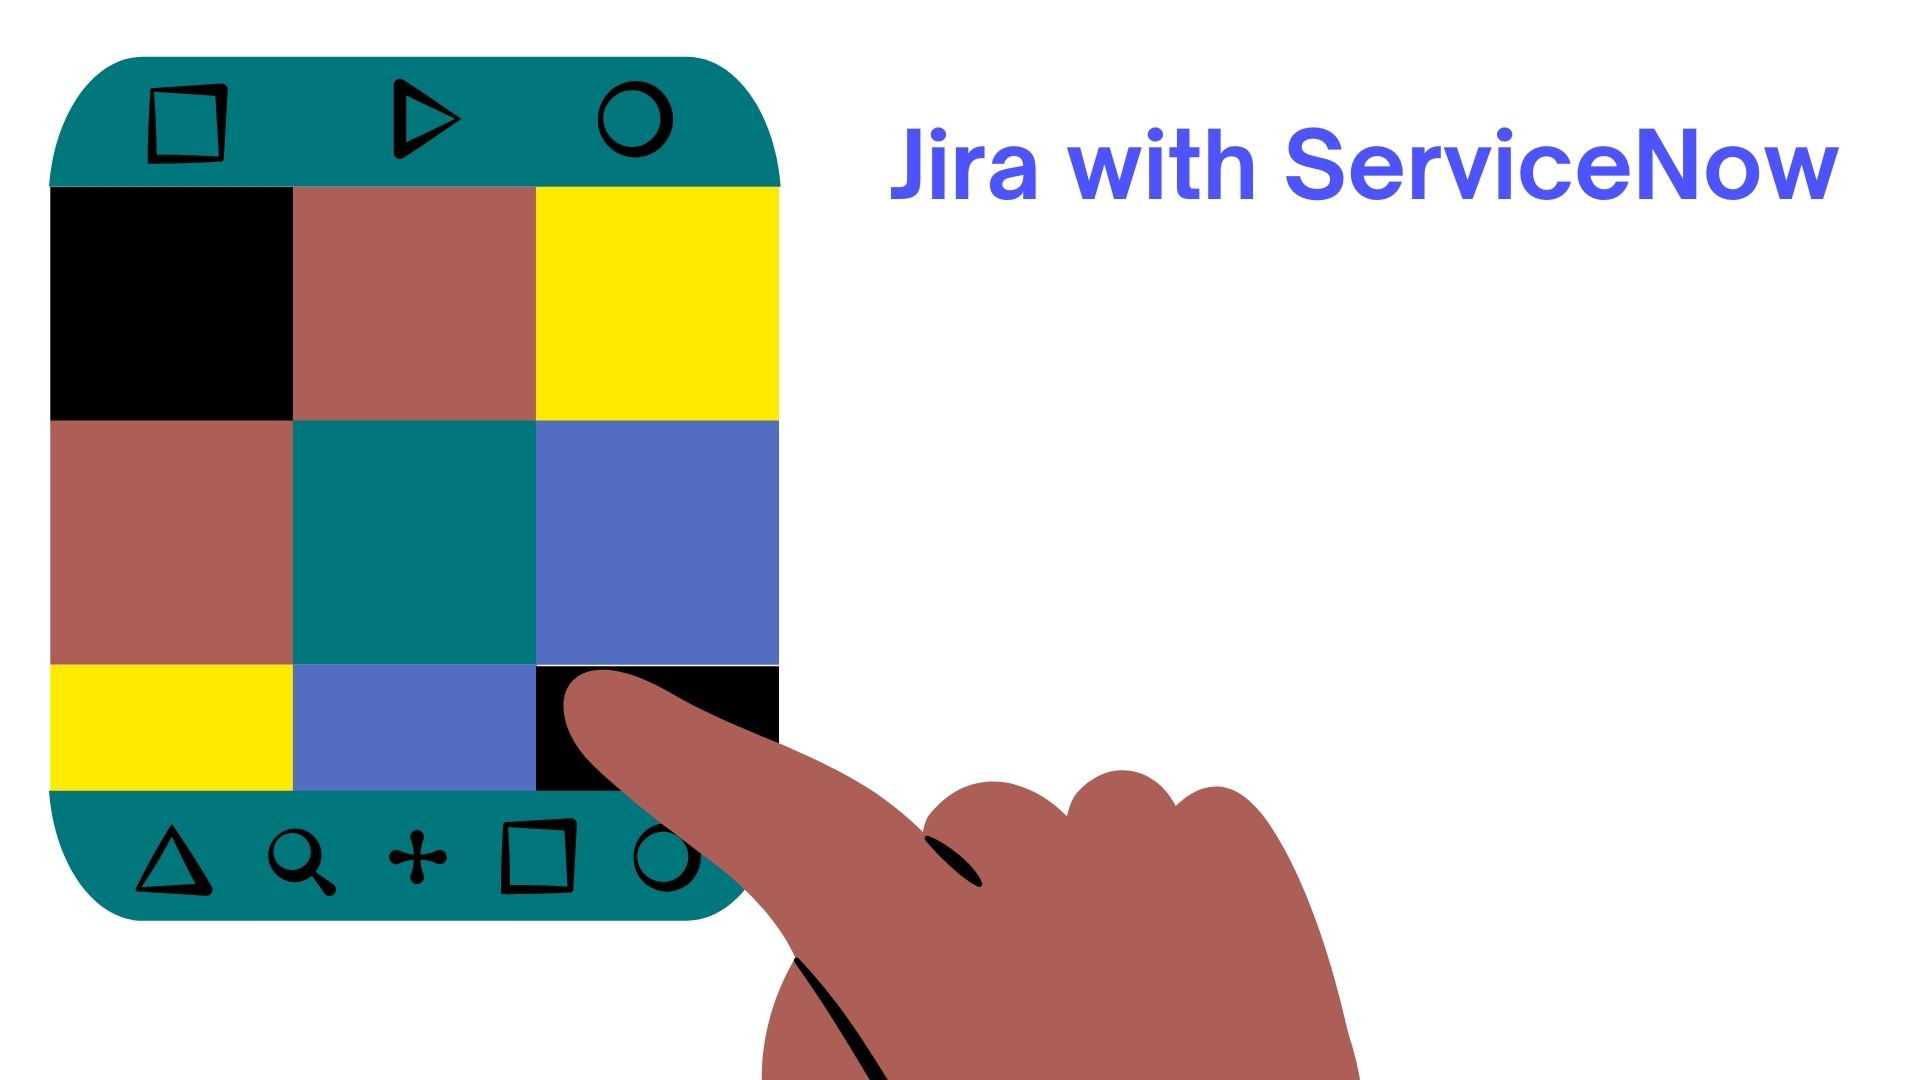 JIRA with ServiceNow